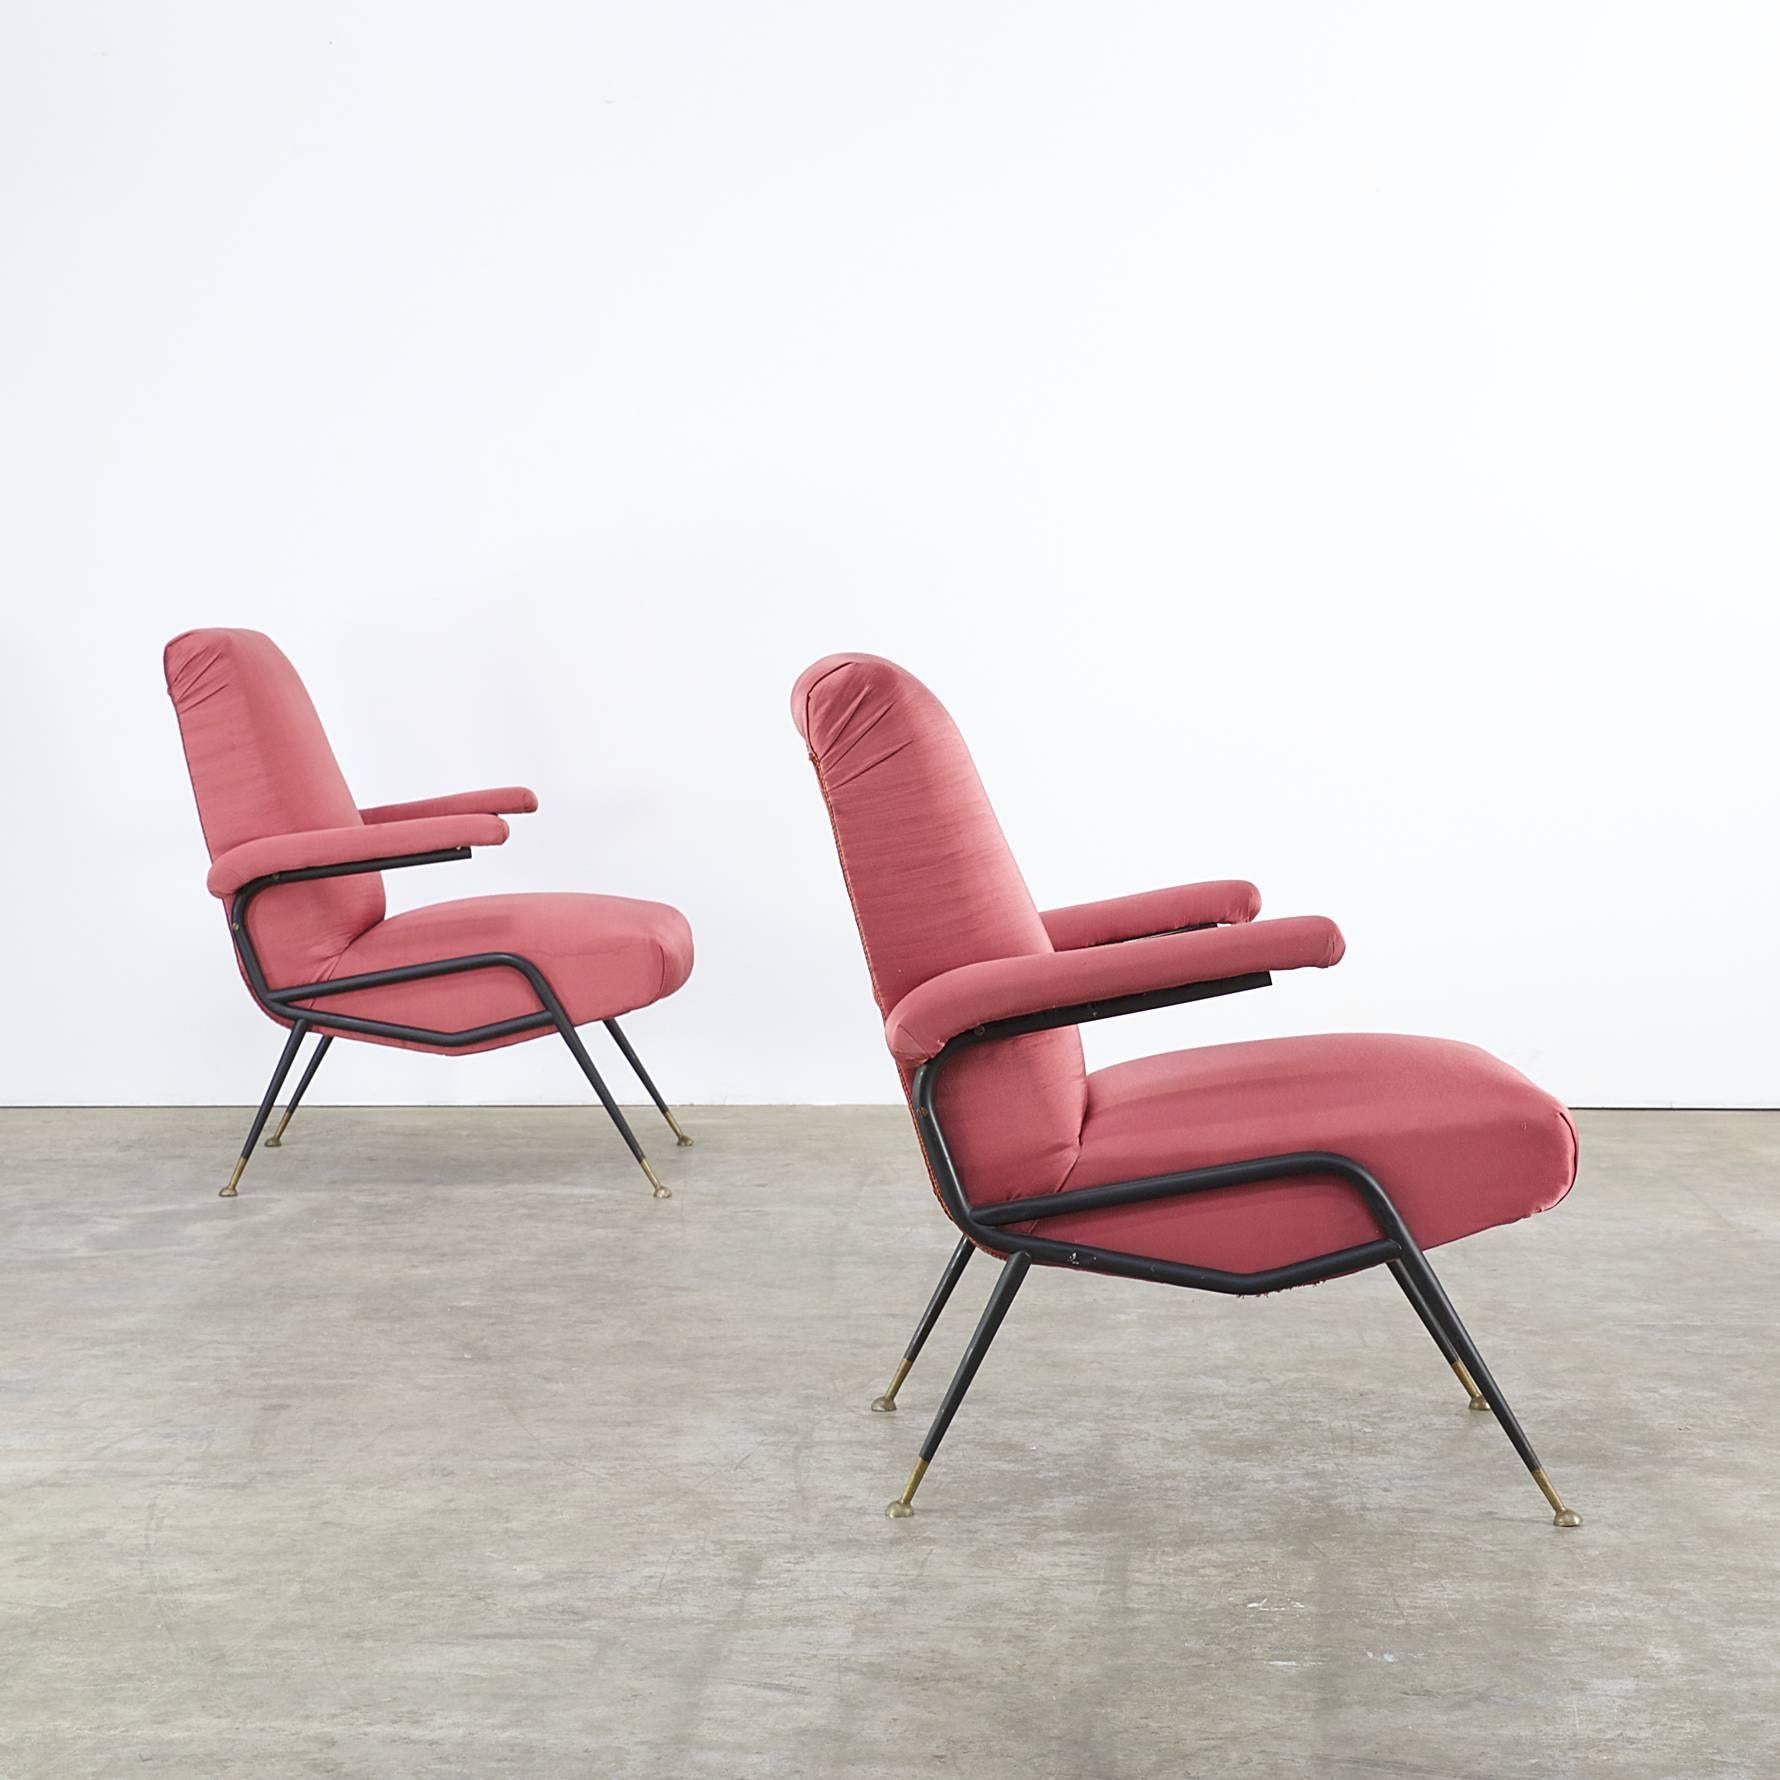 Mid-20th Century 1960s Italian Design Chair in Old Red Fabric, Set of Two For Sale